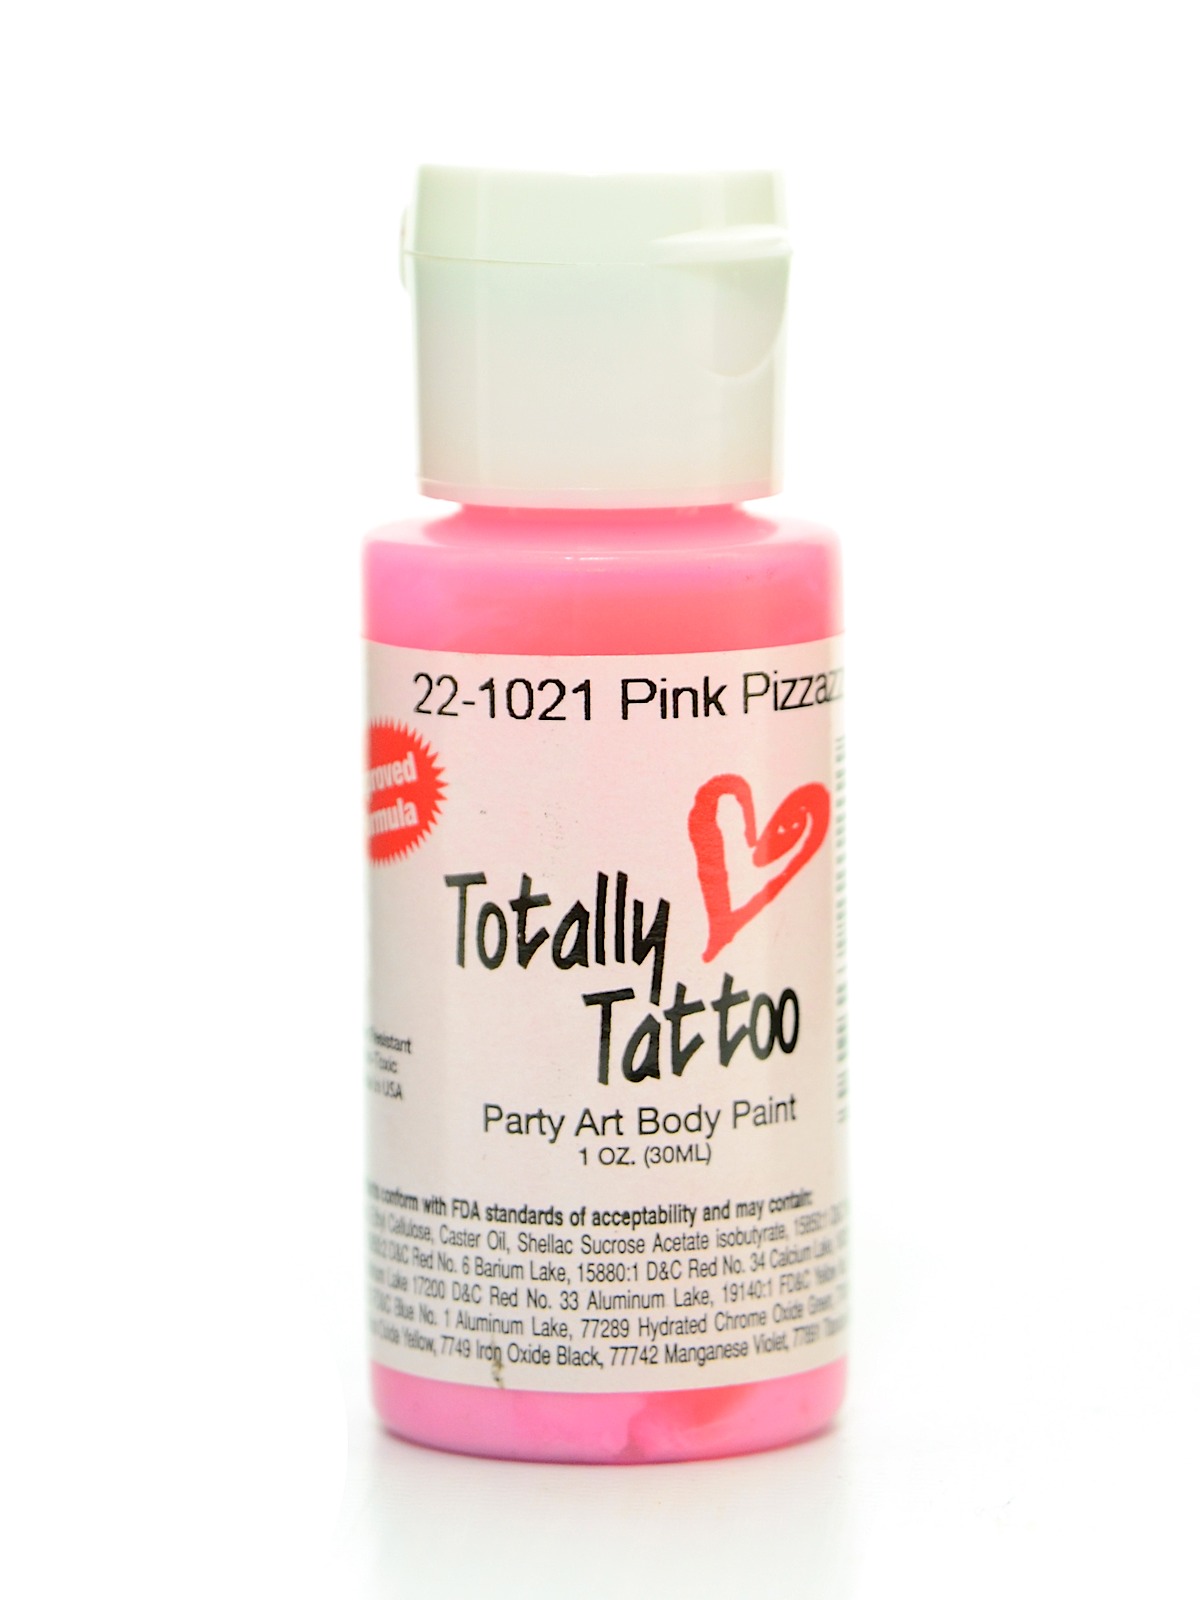 Totally Tattoo System Body Paint Pink Pizzazz 1 Oz.